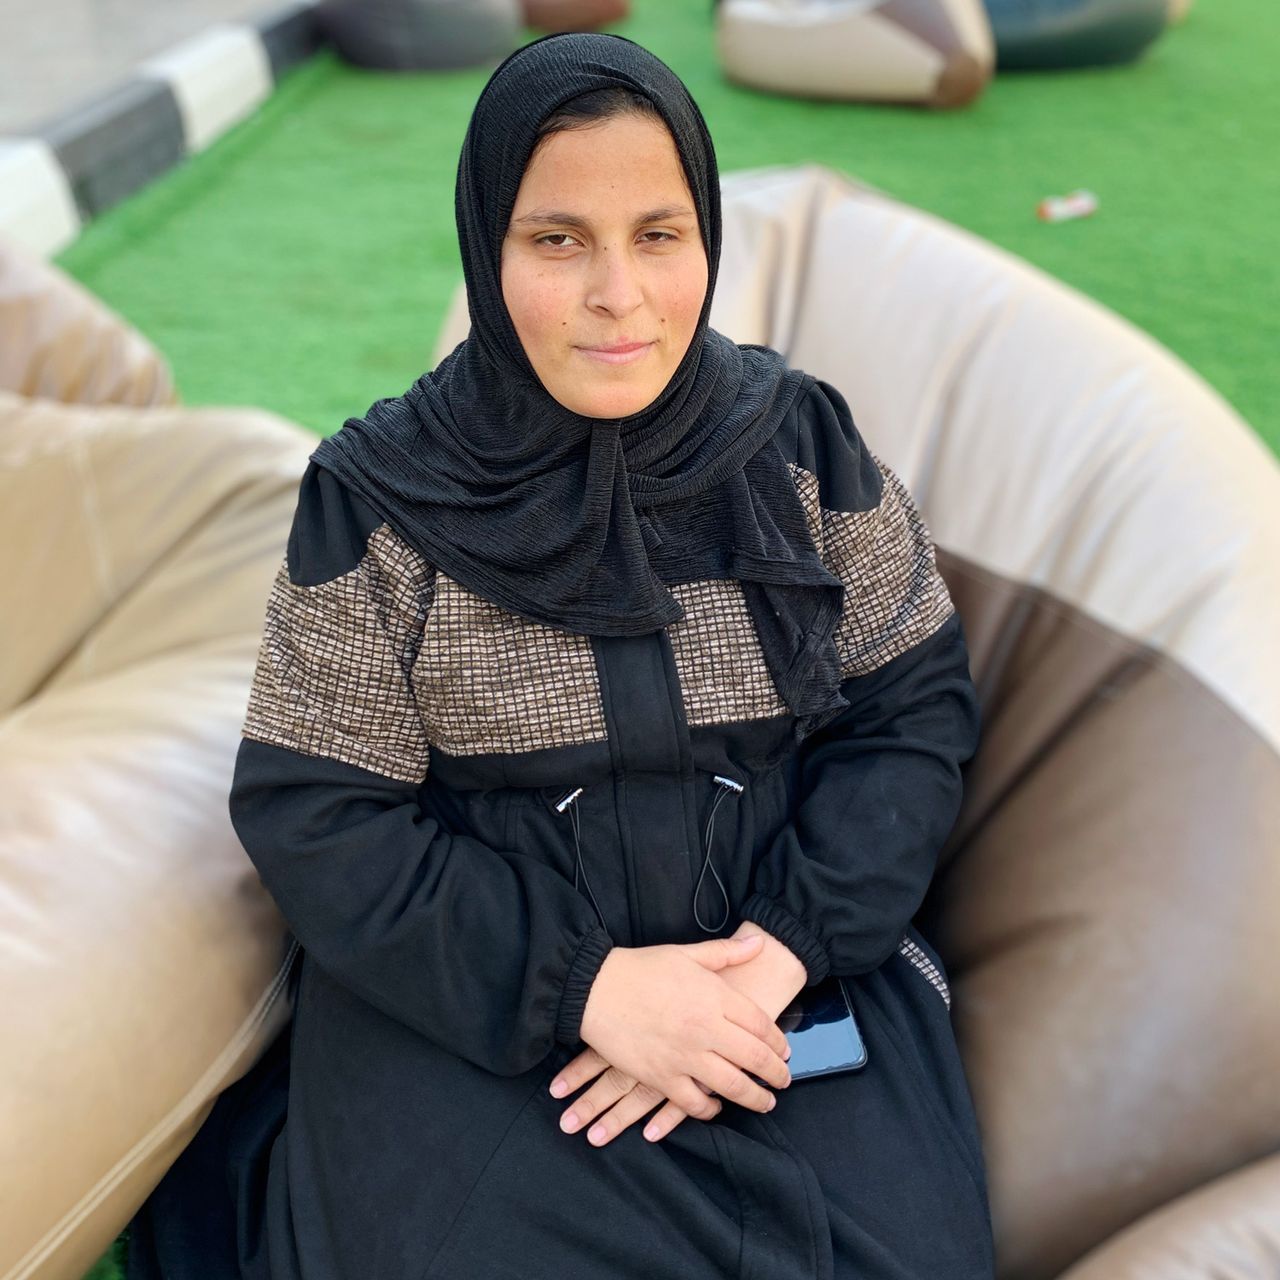 Now in Qatar, Watfah hopes to reunite with her children.